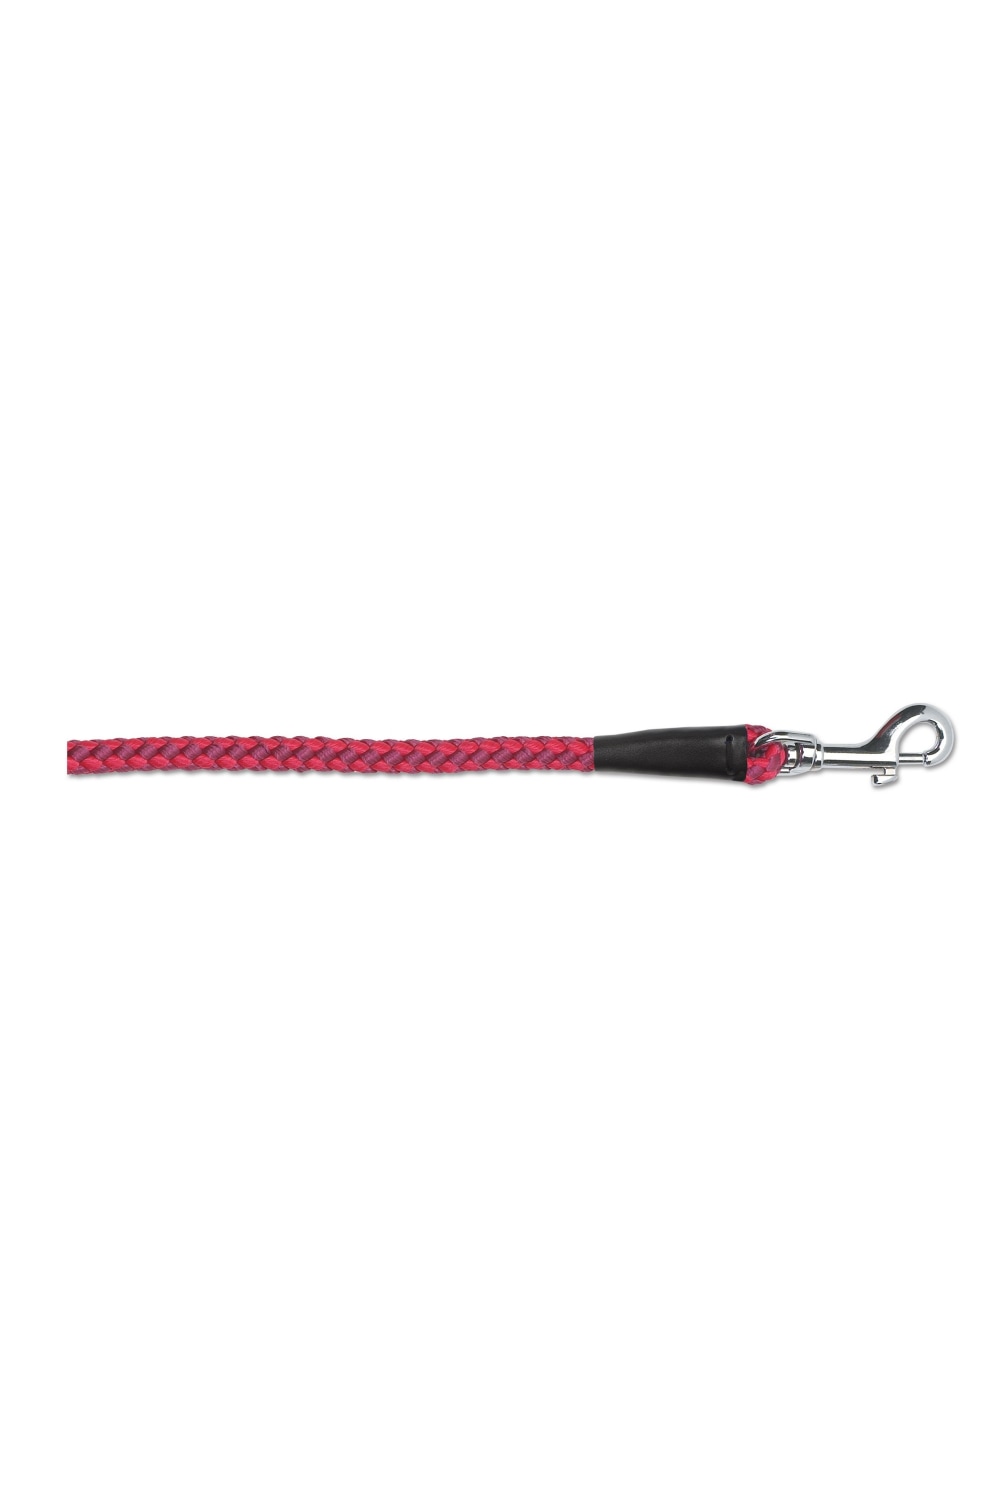 Ancol Pet Products Heritage Rope Dog Lead (Red) (0.4in x 0.61m)